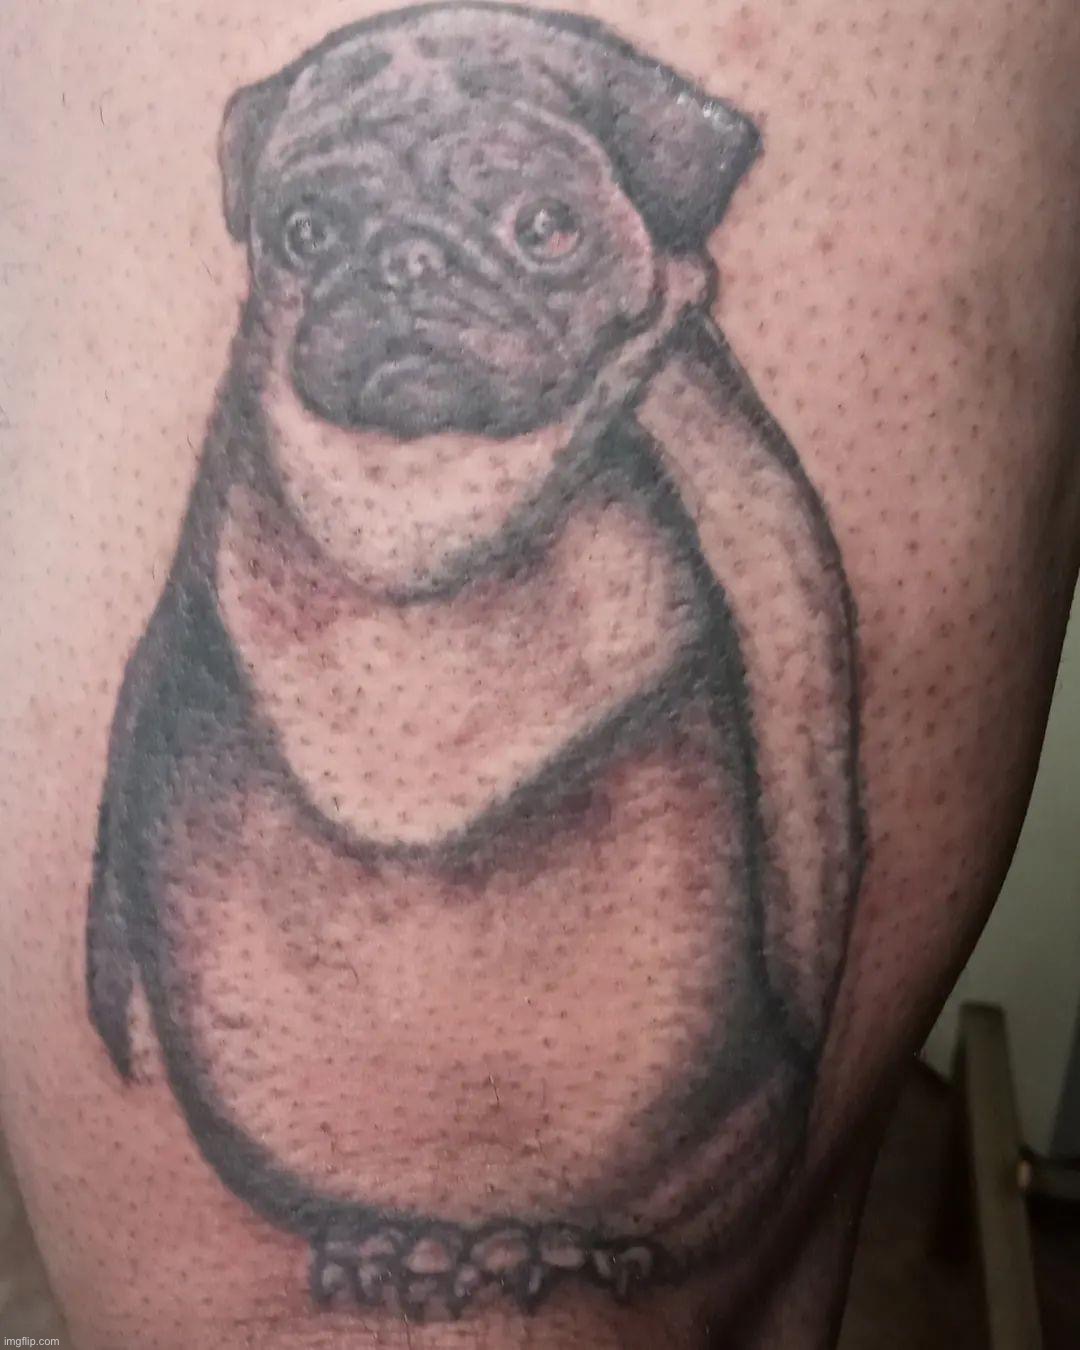 Puguin tattoo | image tagged in puguin tattoo | made w/ Imgflip meme maker